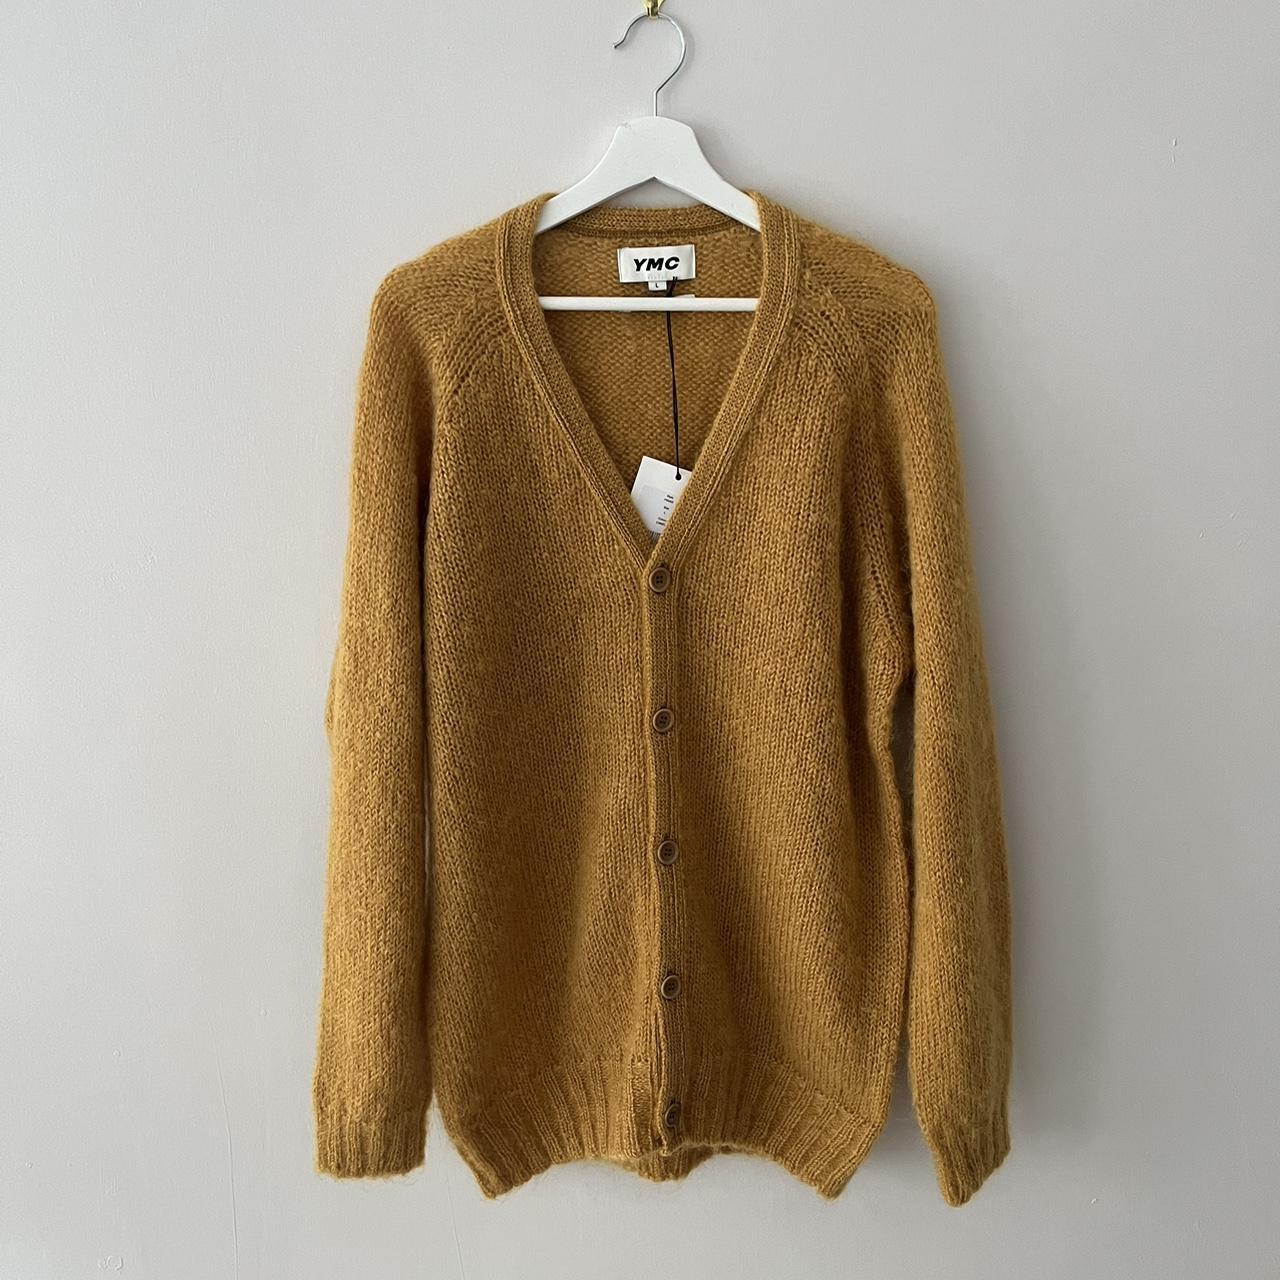 YMC Tan Mohair Sid Cardigan, Brand new with tags, Made